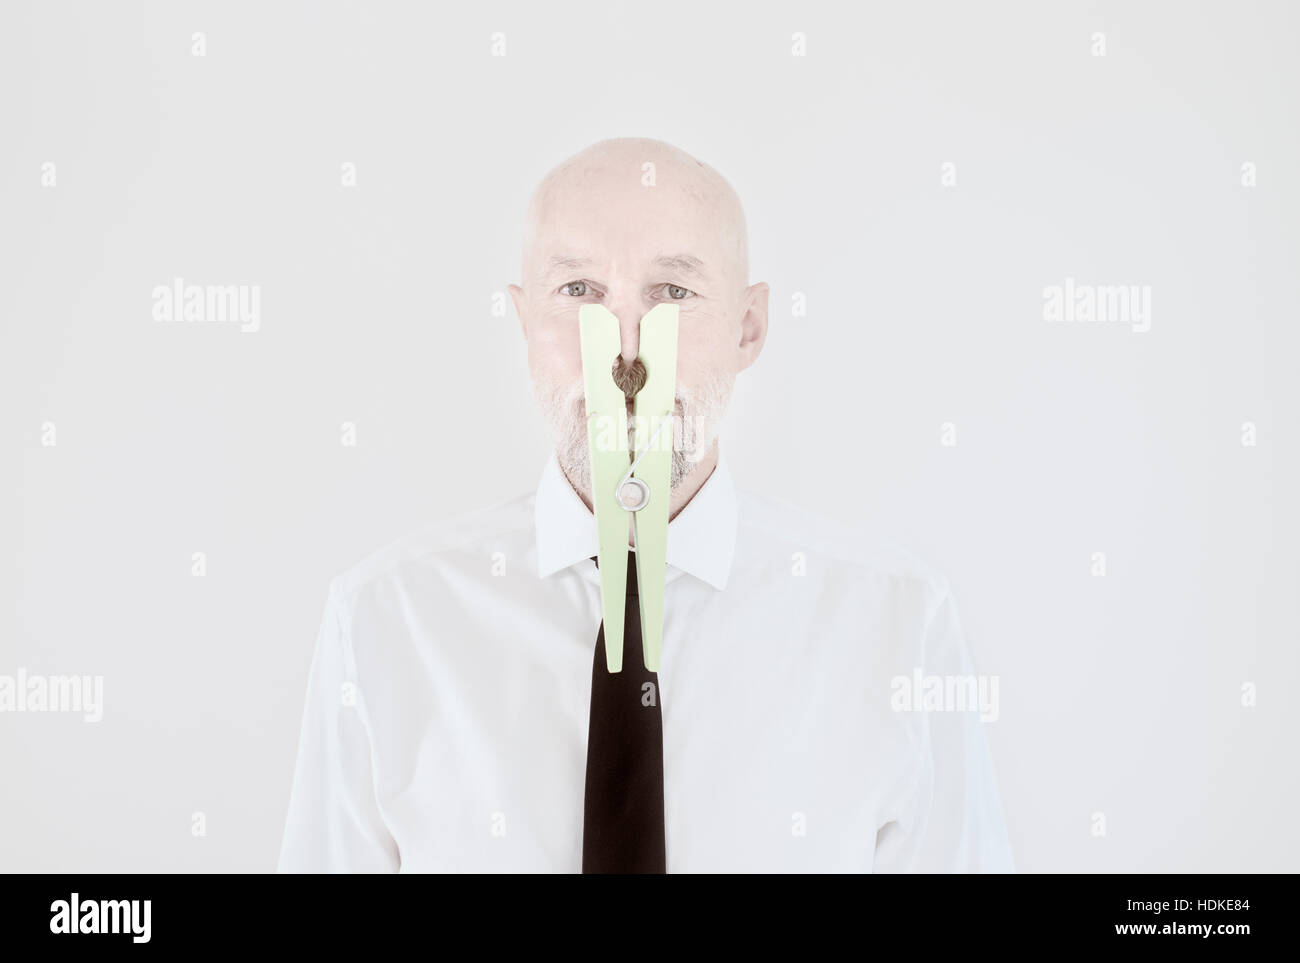 Old man with big clothespin covering his nose. Humorous portrait of elderly male. Concept of bad smell, absurd behaviour and contrast between serious Stock Photo